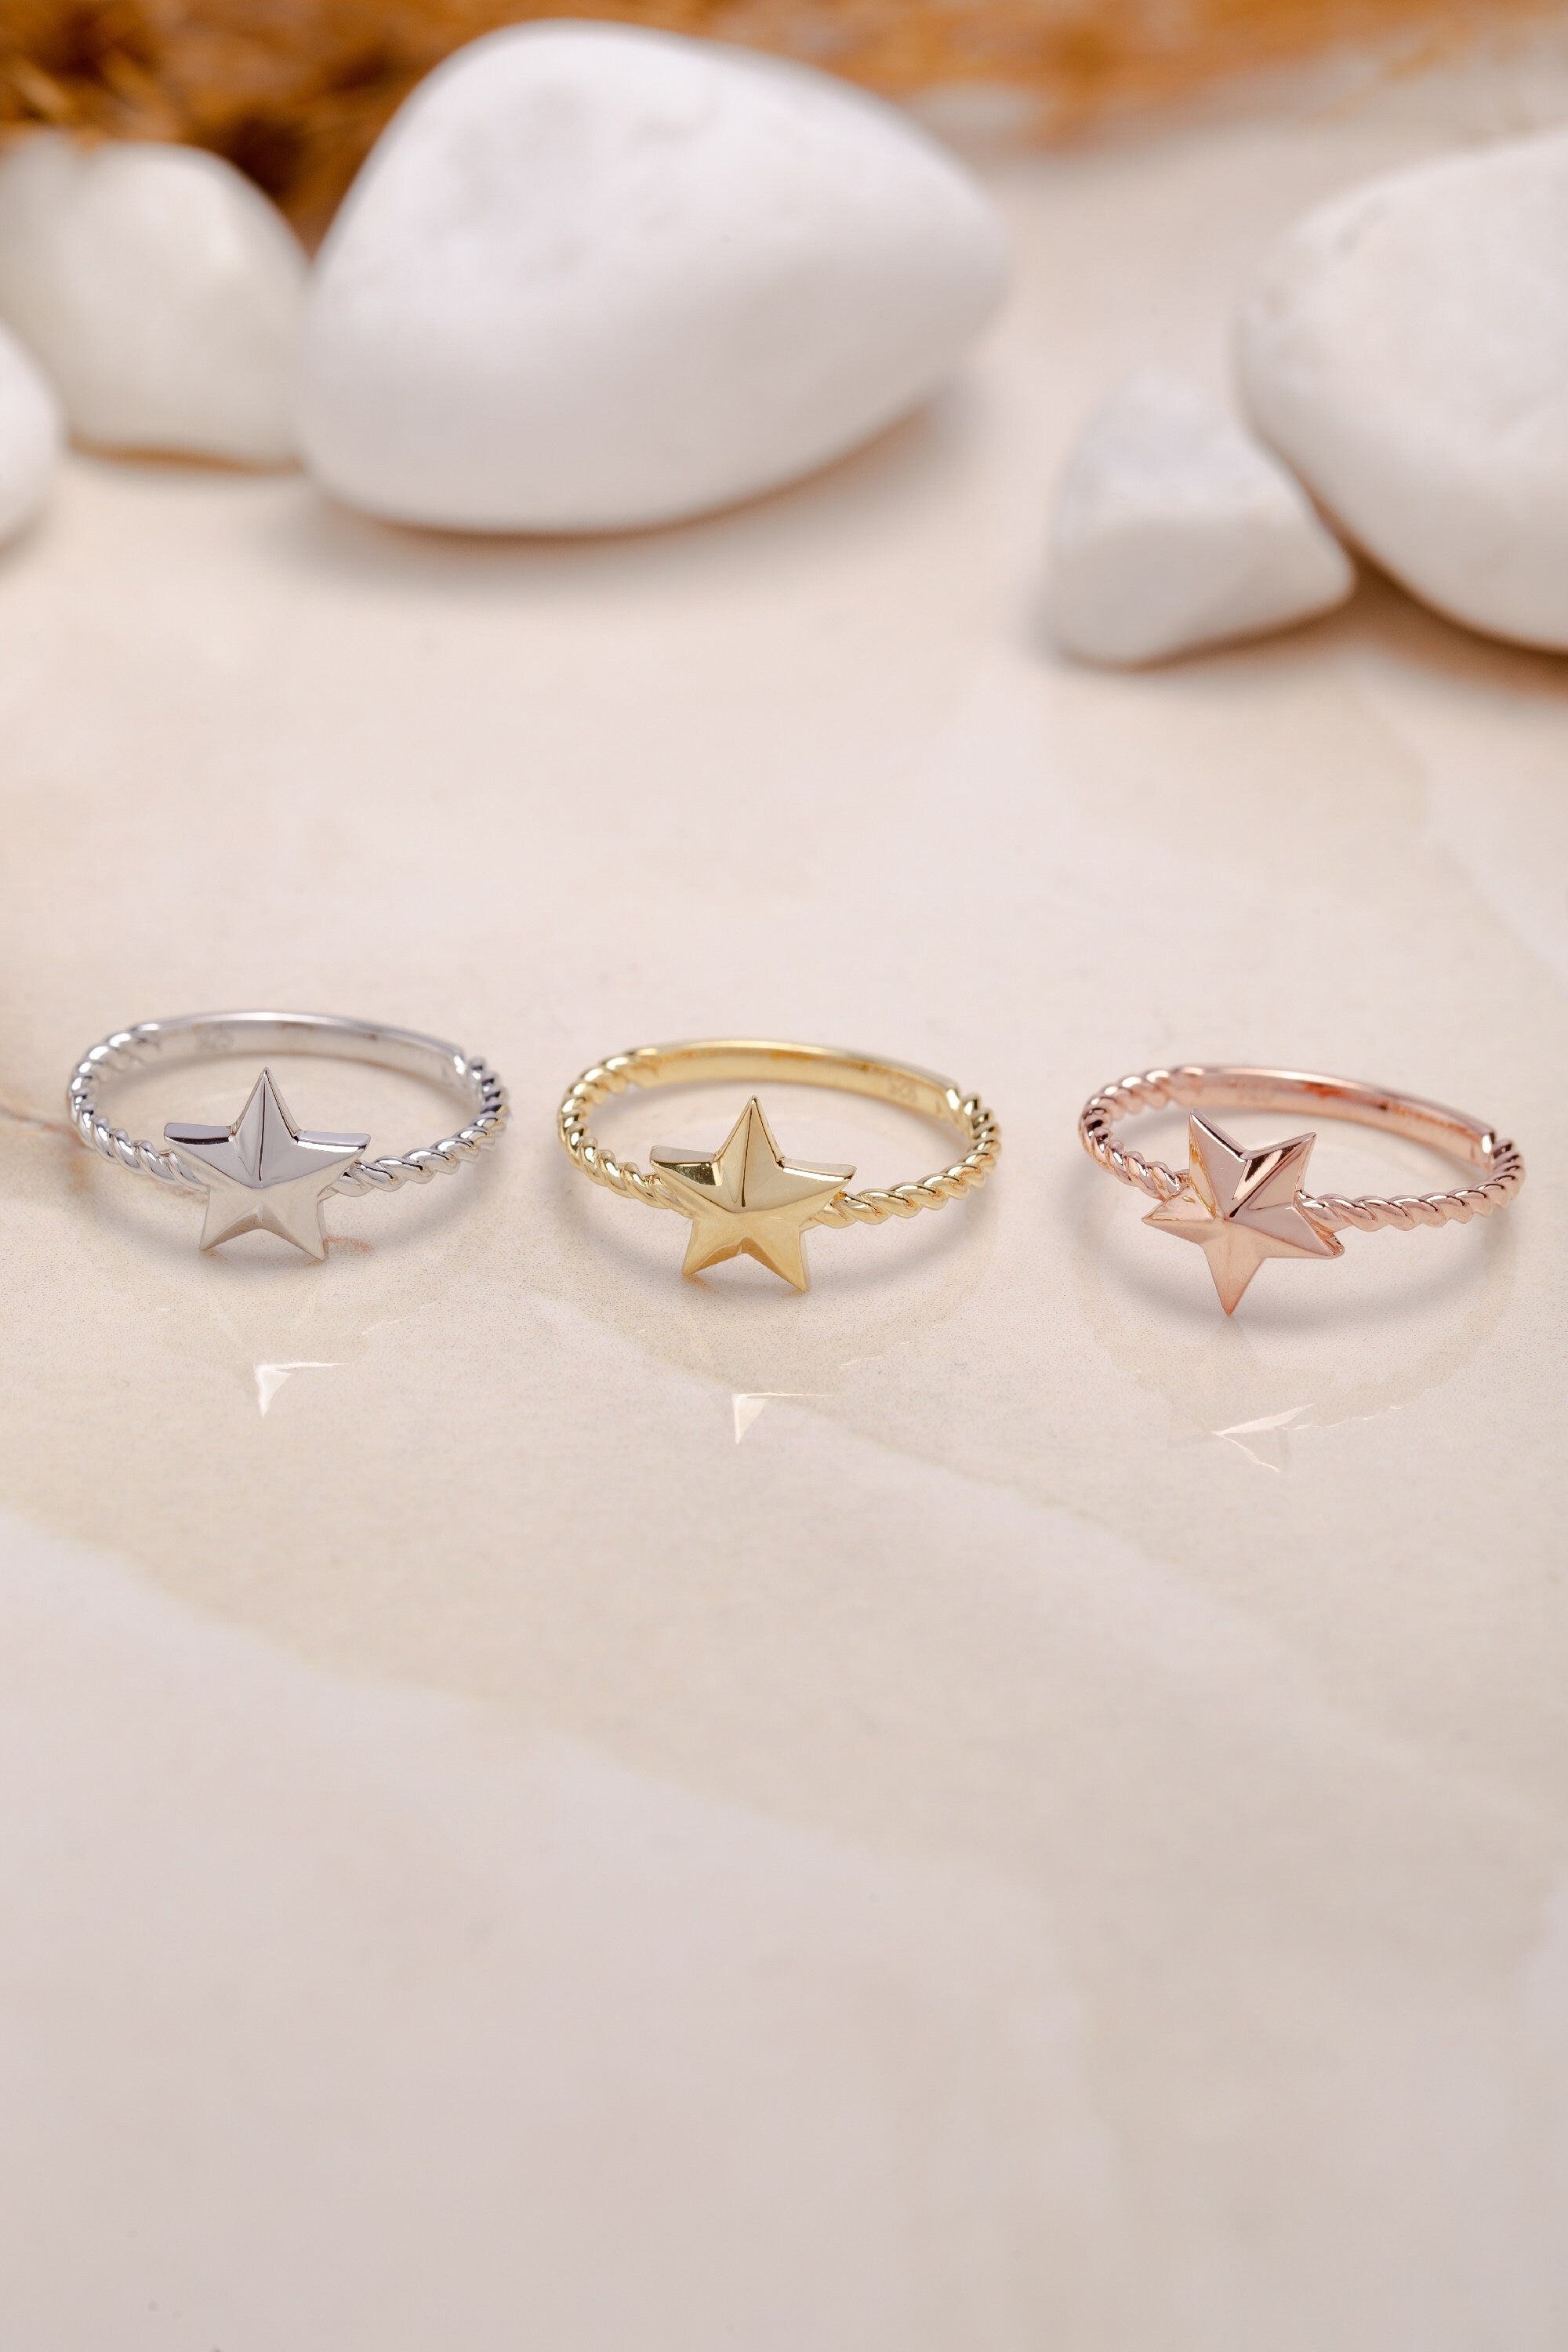 Star Shaped 18k Yellow Gold Ring, Handmade Dainty Star Ring, Delicate Star Ring, Gift For Mother Day, Mother Day Jewelry, Gift for Her